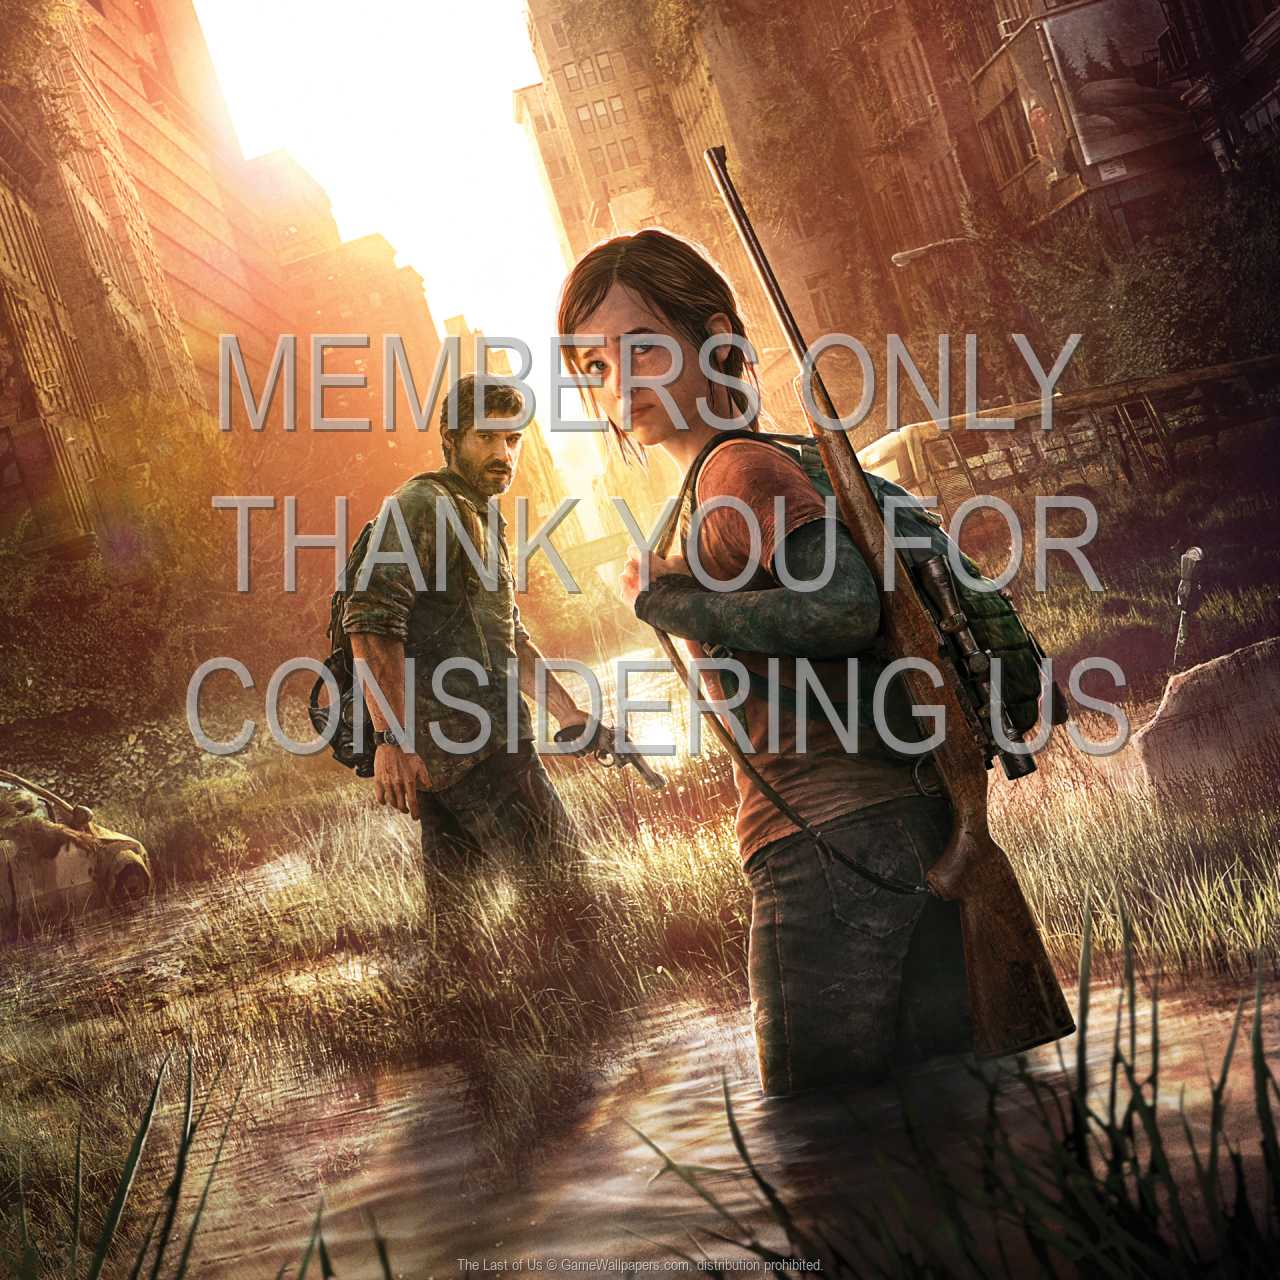 The Last of Us 720p%20Horizontal Mobile wallpaper or background 17